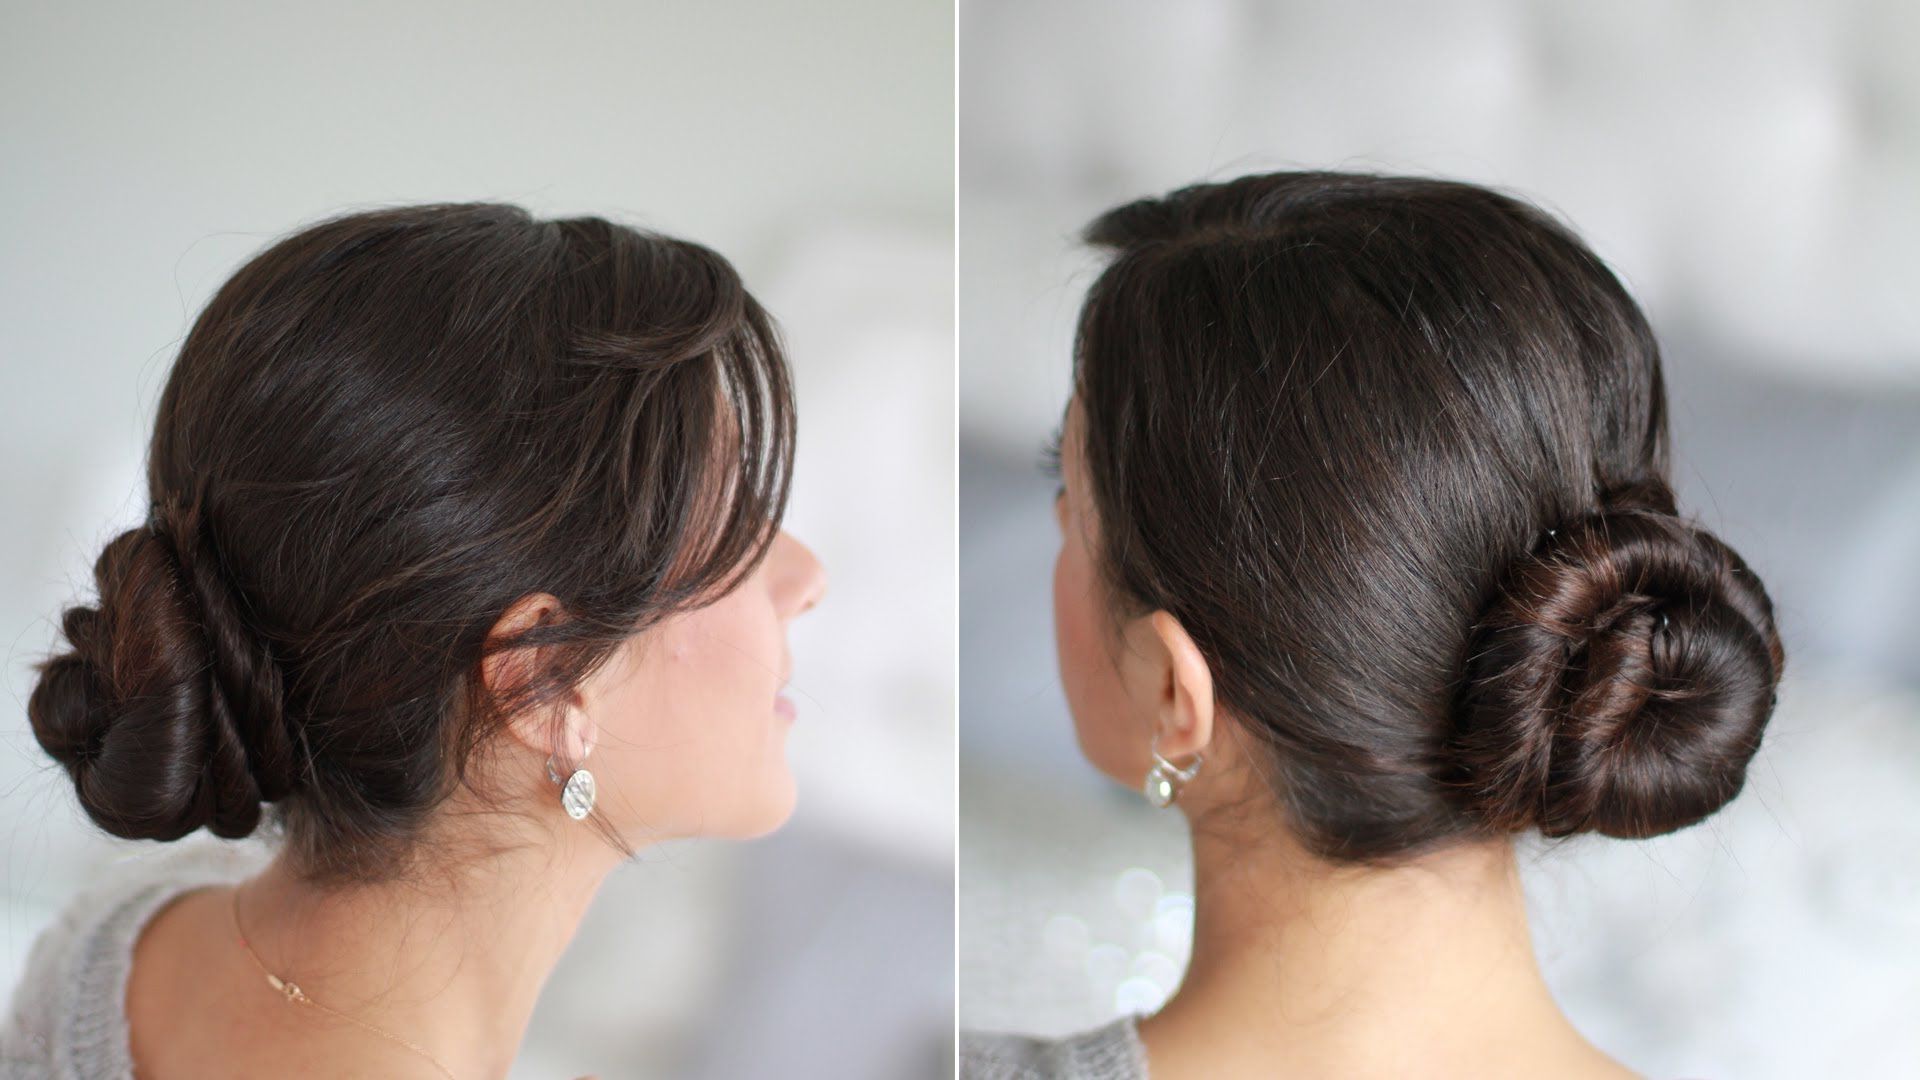 Cinnamon Bun Hairstyle Is Great For Work, School Or An Pertaining To Popular Cinnamon Bun Braided Hairstyles (View 2 of 20)